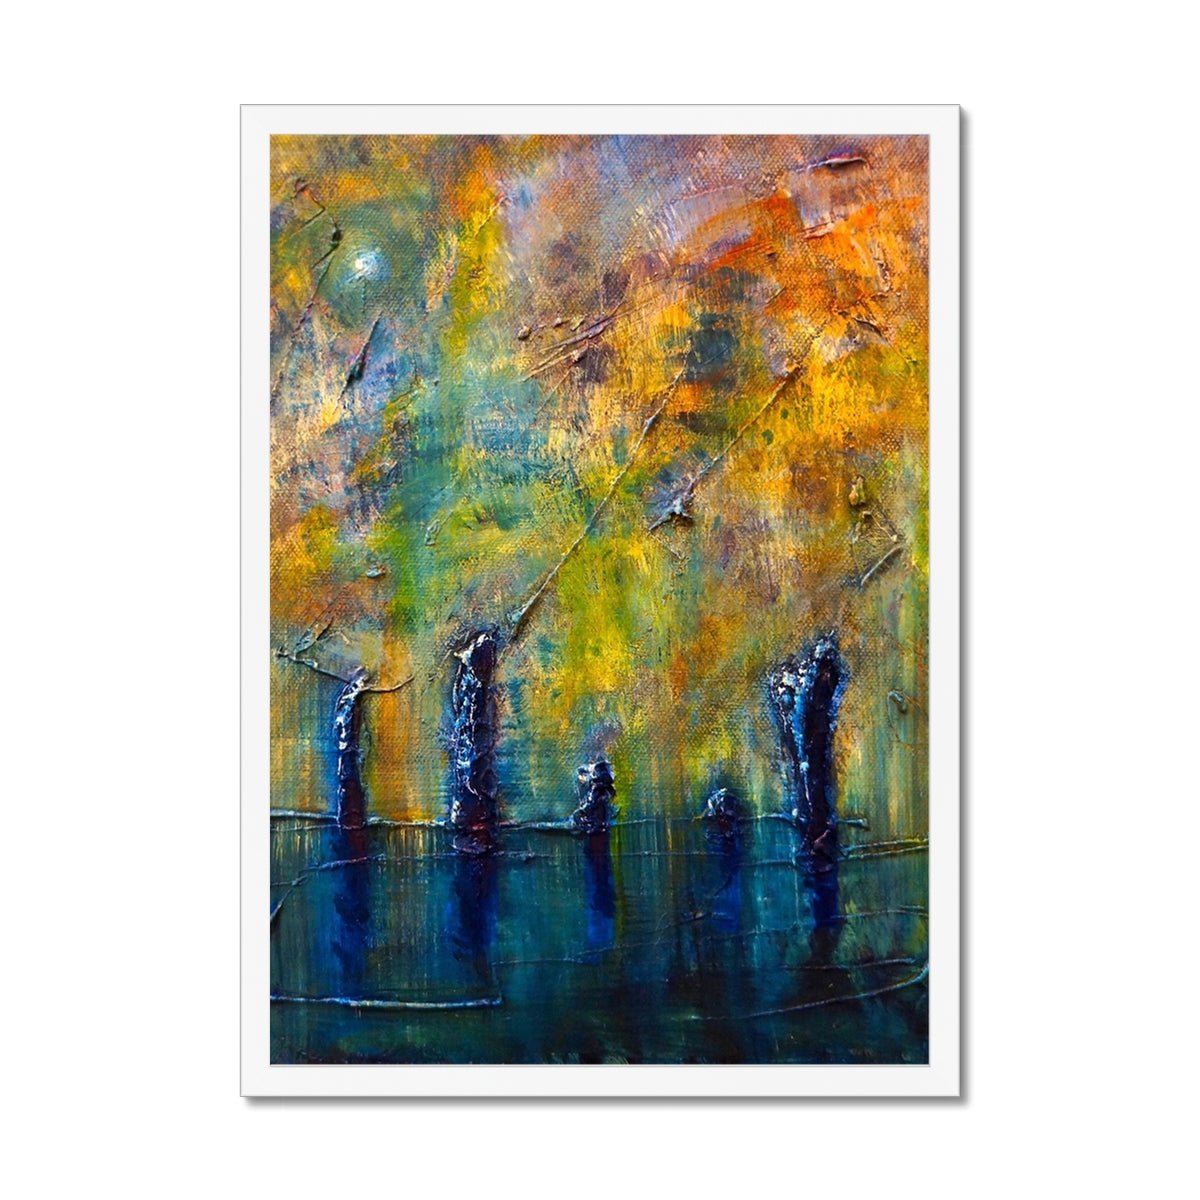 Stenness Moonlight Orkney Painting | Framed Prints From Scotland-Framed Prints-Orkney Art Gallery-A2 Portrait-White Frame-Paintings, Prints, Homeware, Art Gifts From Scotland By Scottish Artist Kevin Hunter